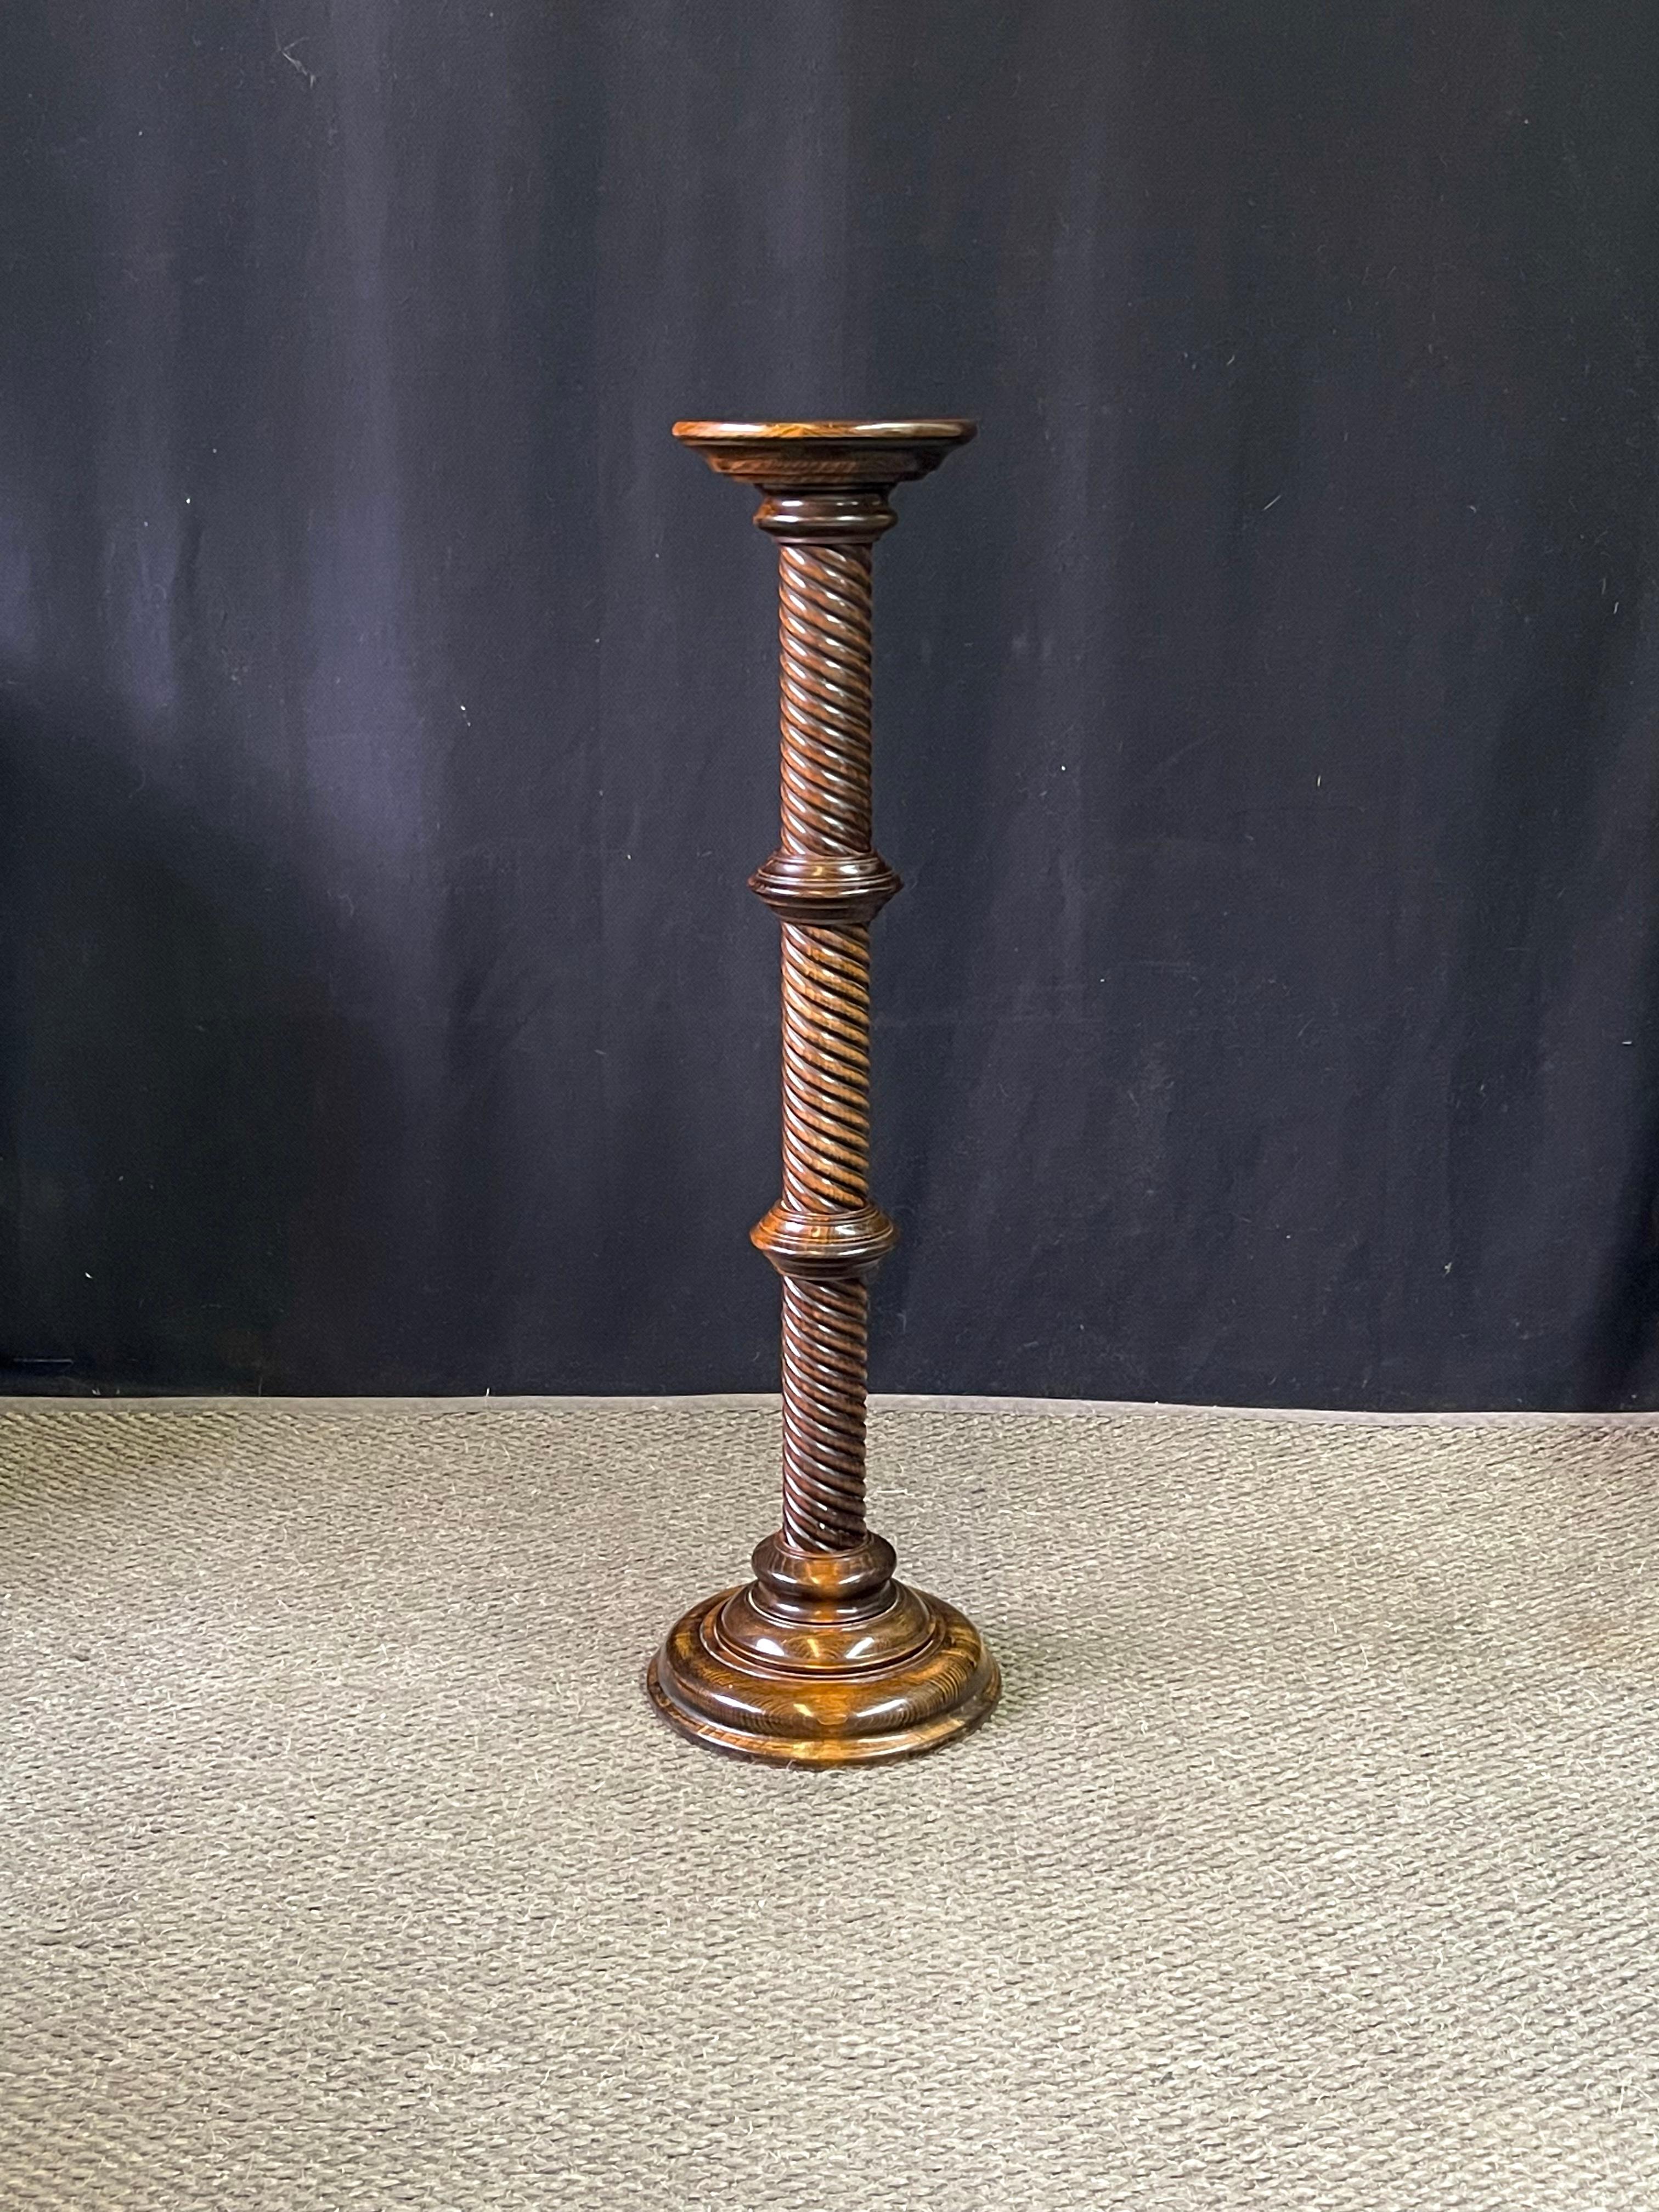 This is a charming 20th century English William IV revival plant stand or torchère of oak in the original finish. The plant stand features a dished top to securely rest a plant, candle, or a vase. The round top smoothly tapers to a handsome turned